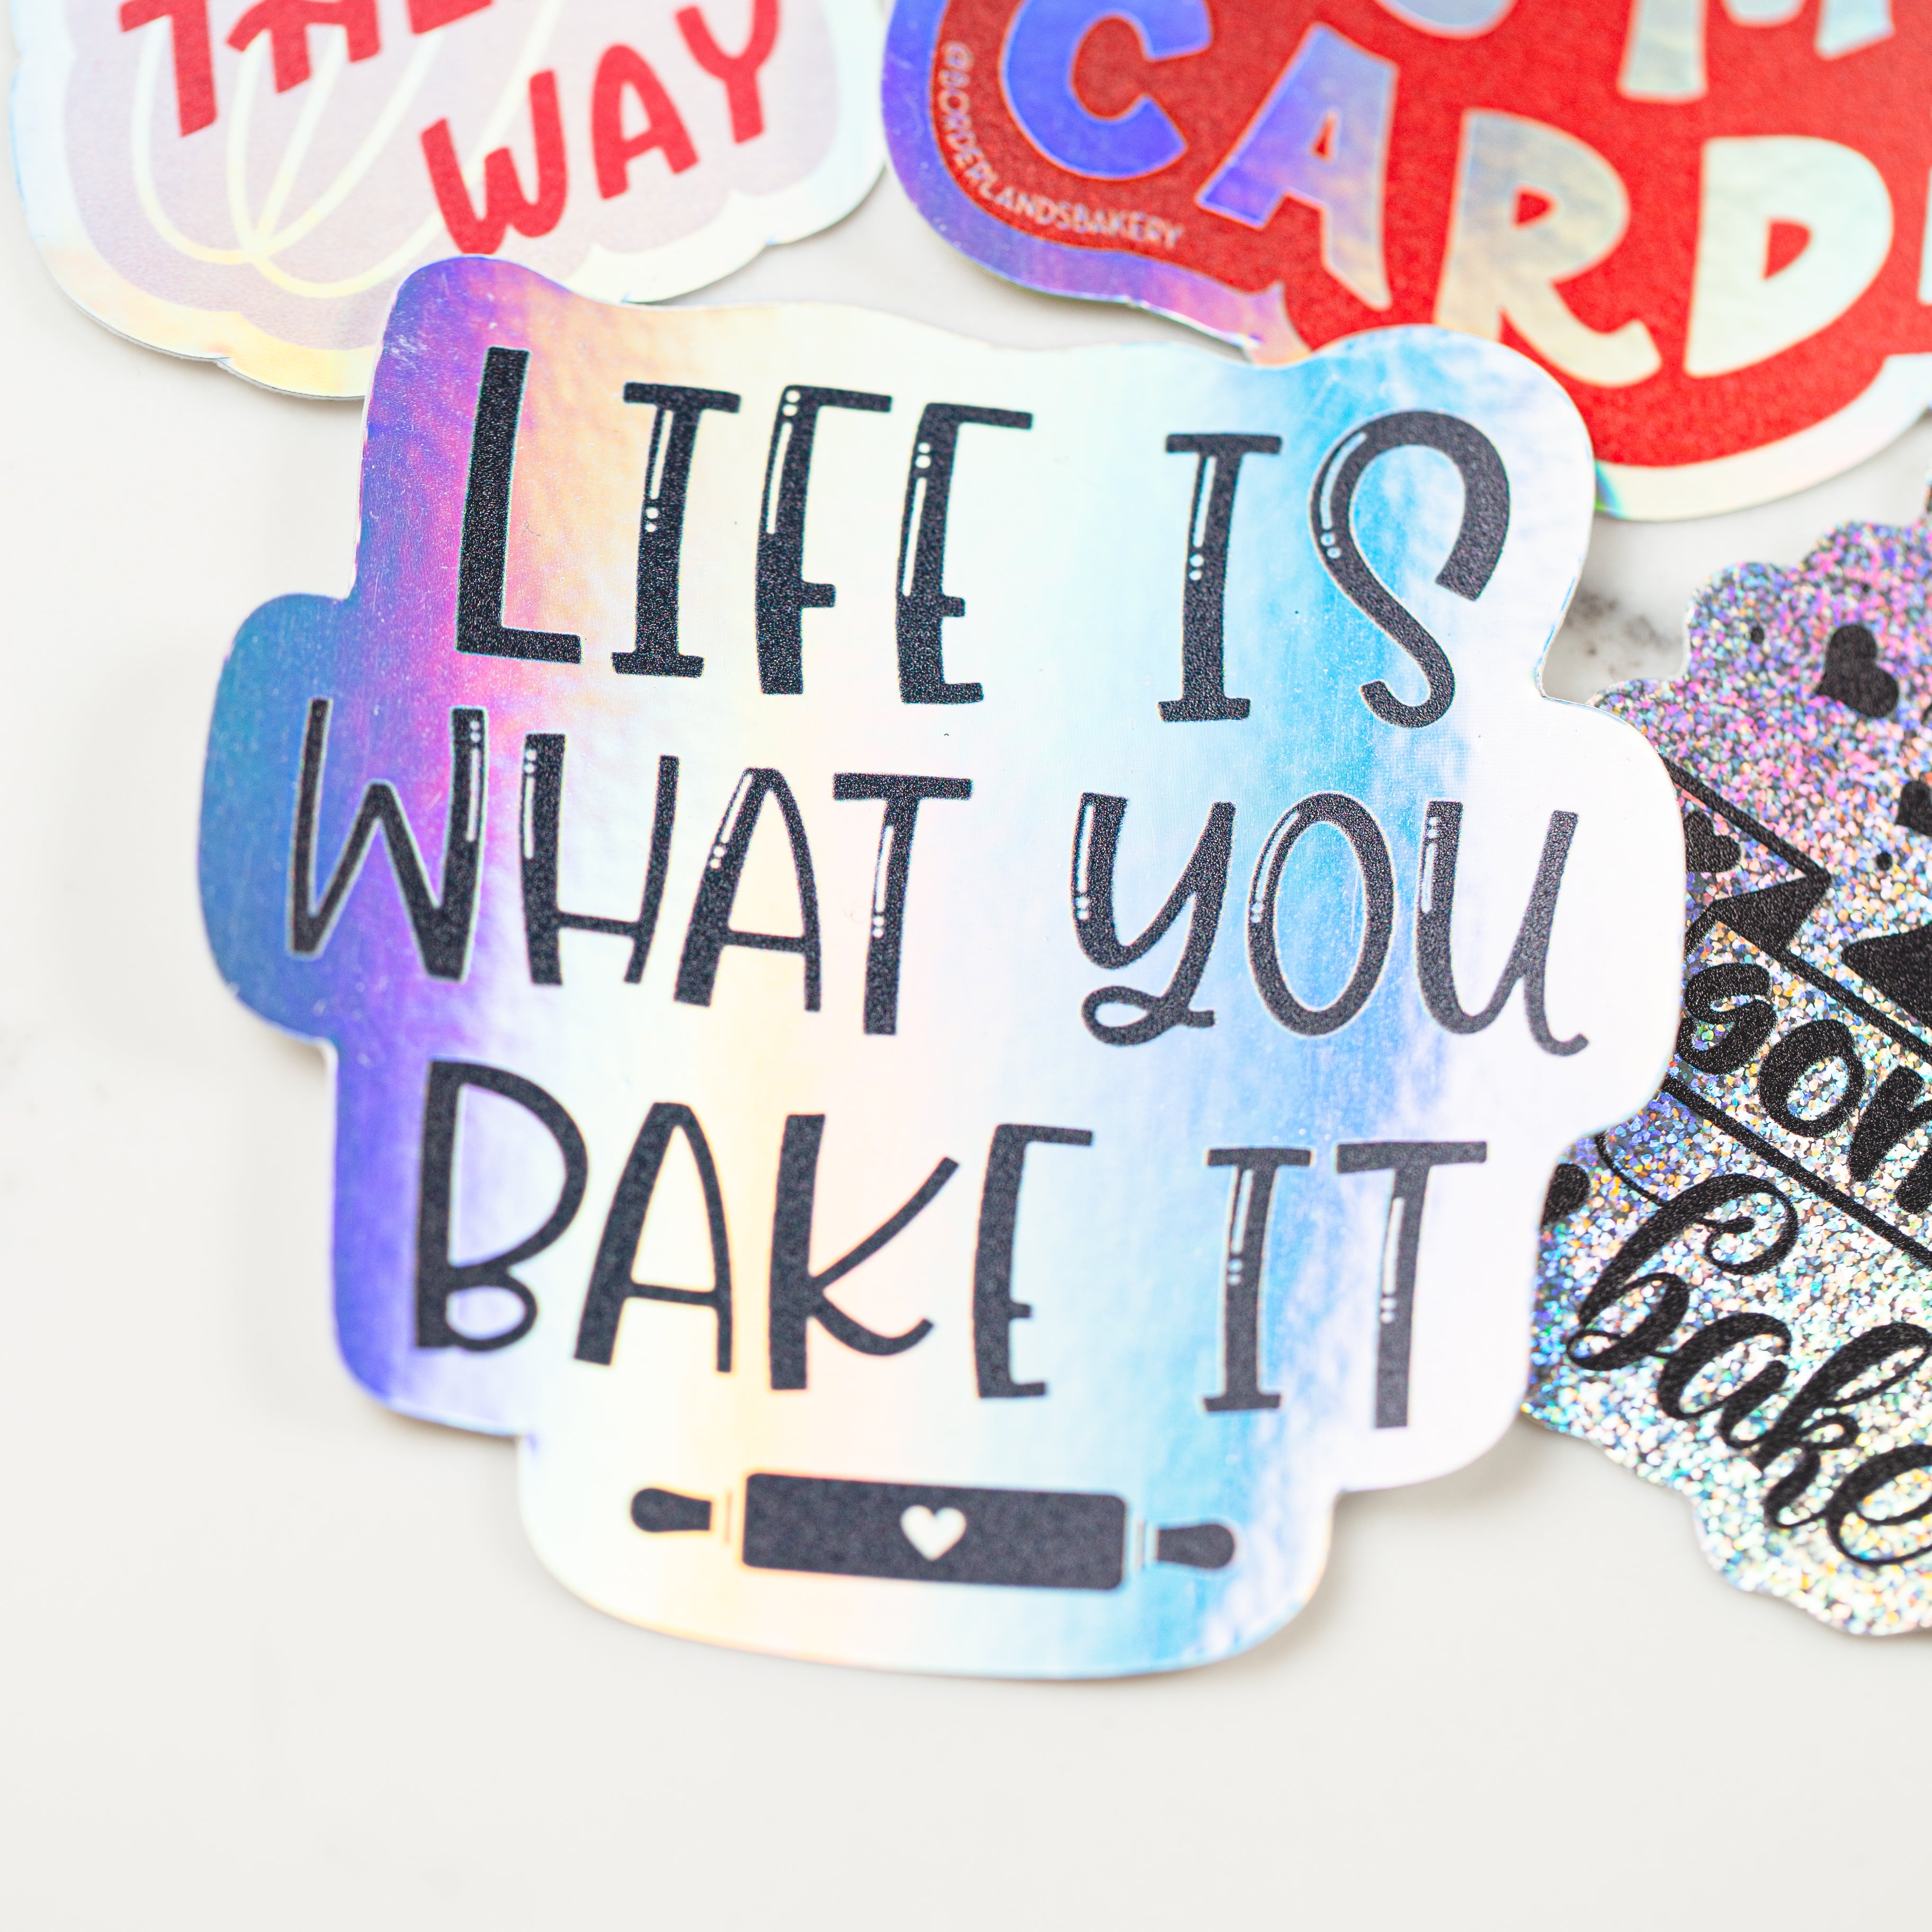 Baking Stickers